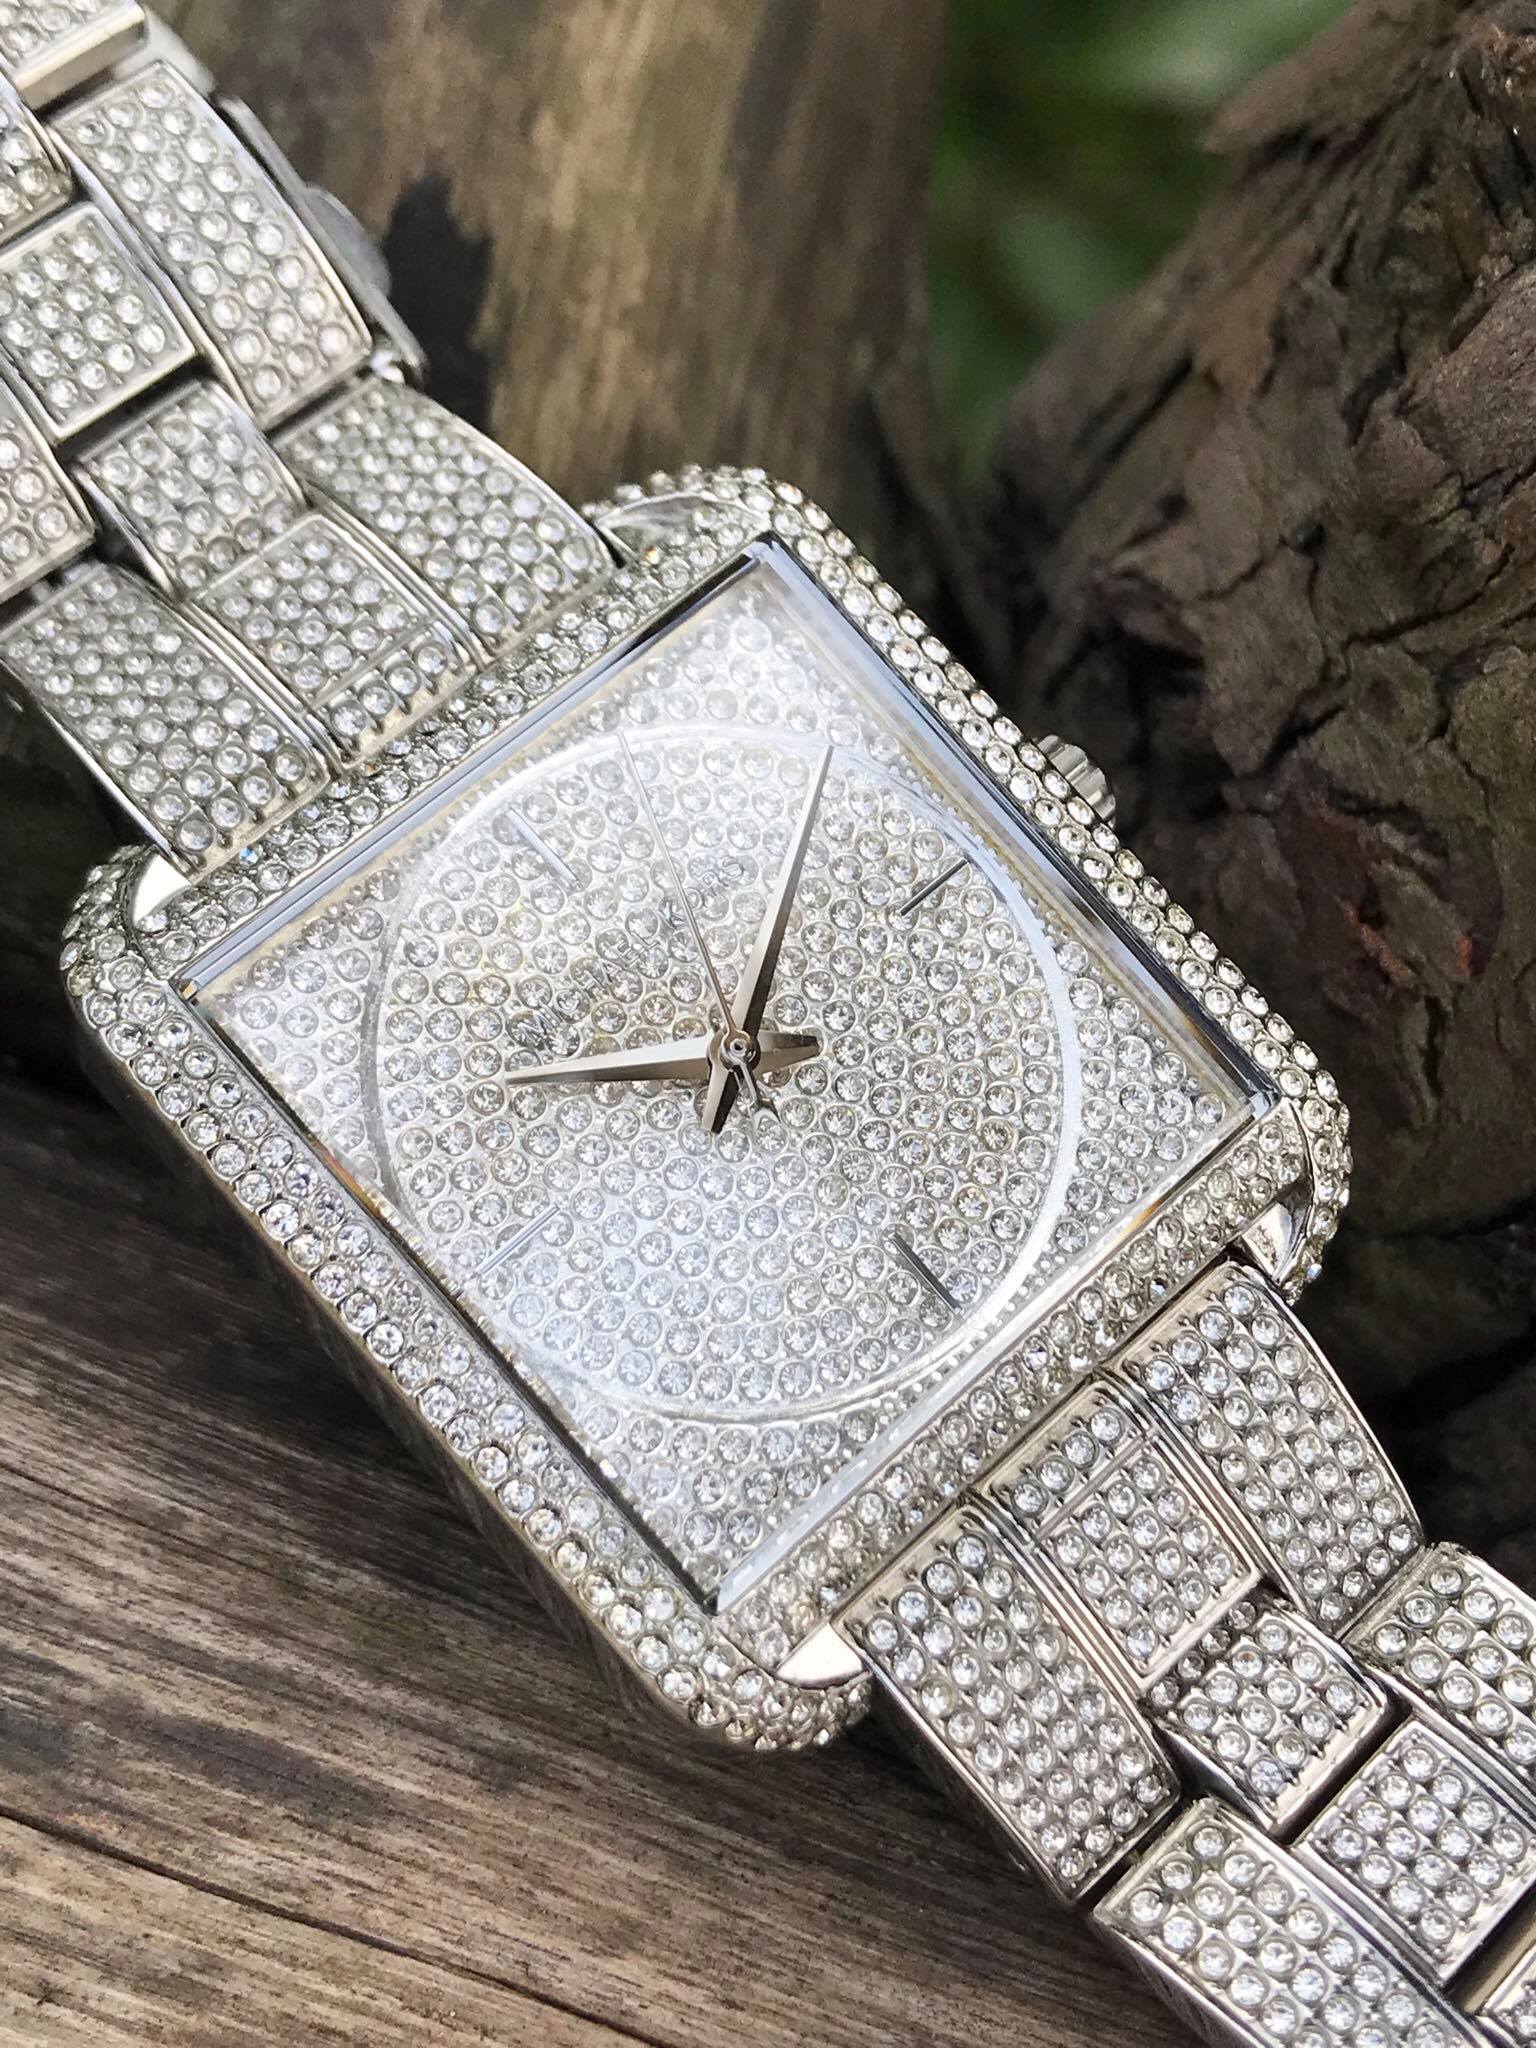 Michael Kors Gold Michael Kors Watch Iced out  Grailed